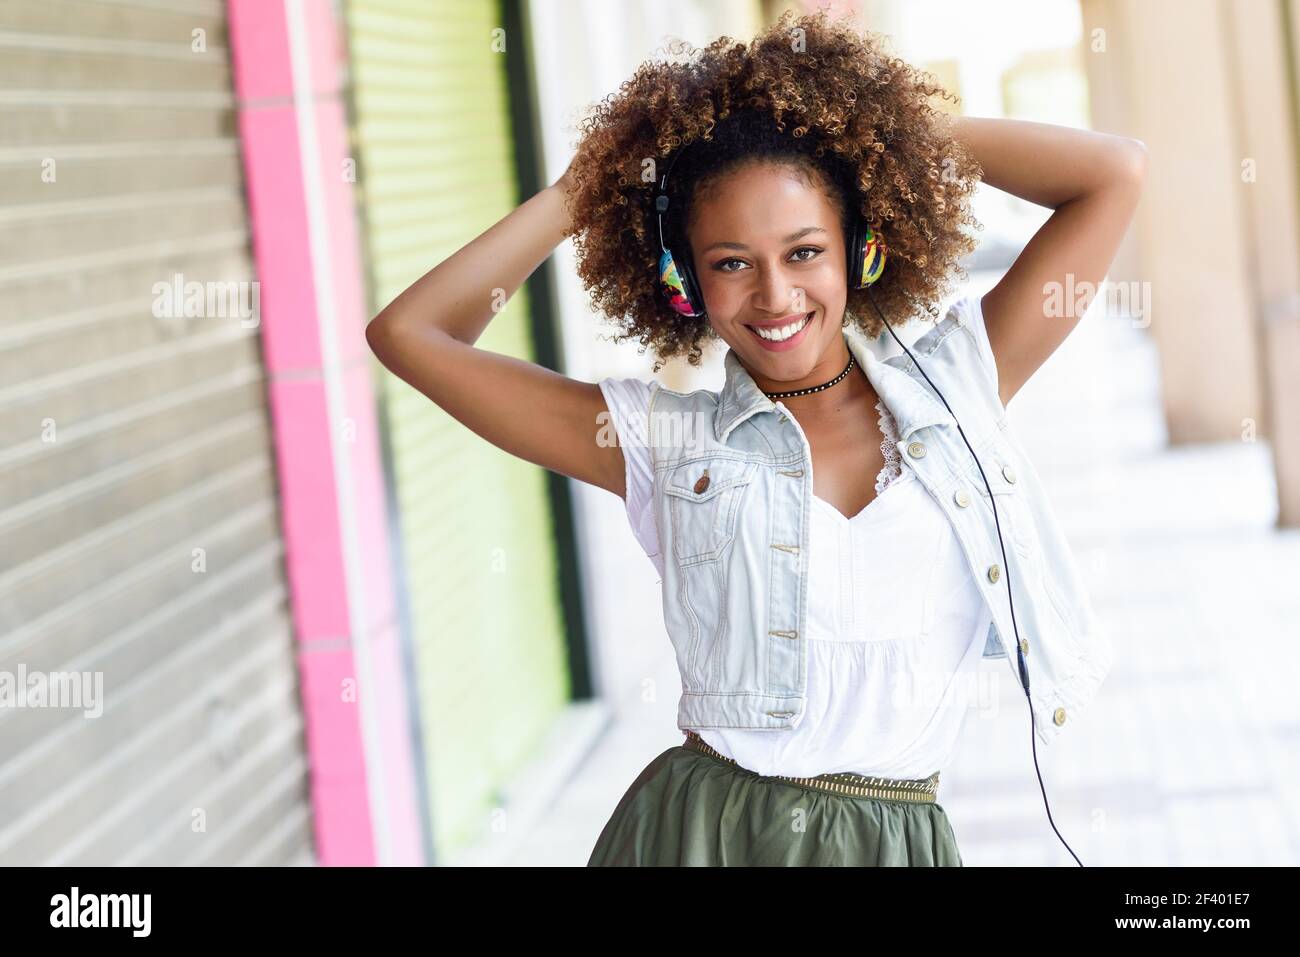 Young black woman, afro hairstyle, in urban street with headphon. Young attractive black woman in urban street listening to the music with headphones. Girl wearing casual clothes with afro hairstyle Stock Photo